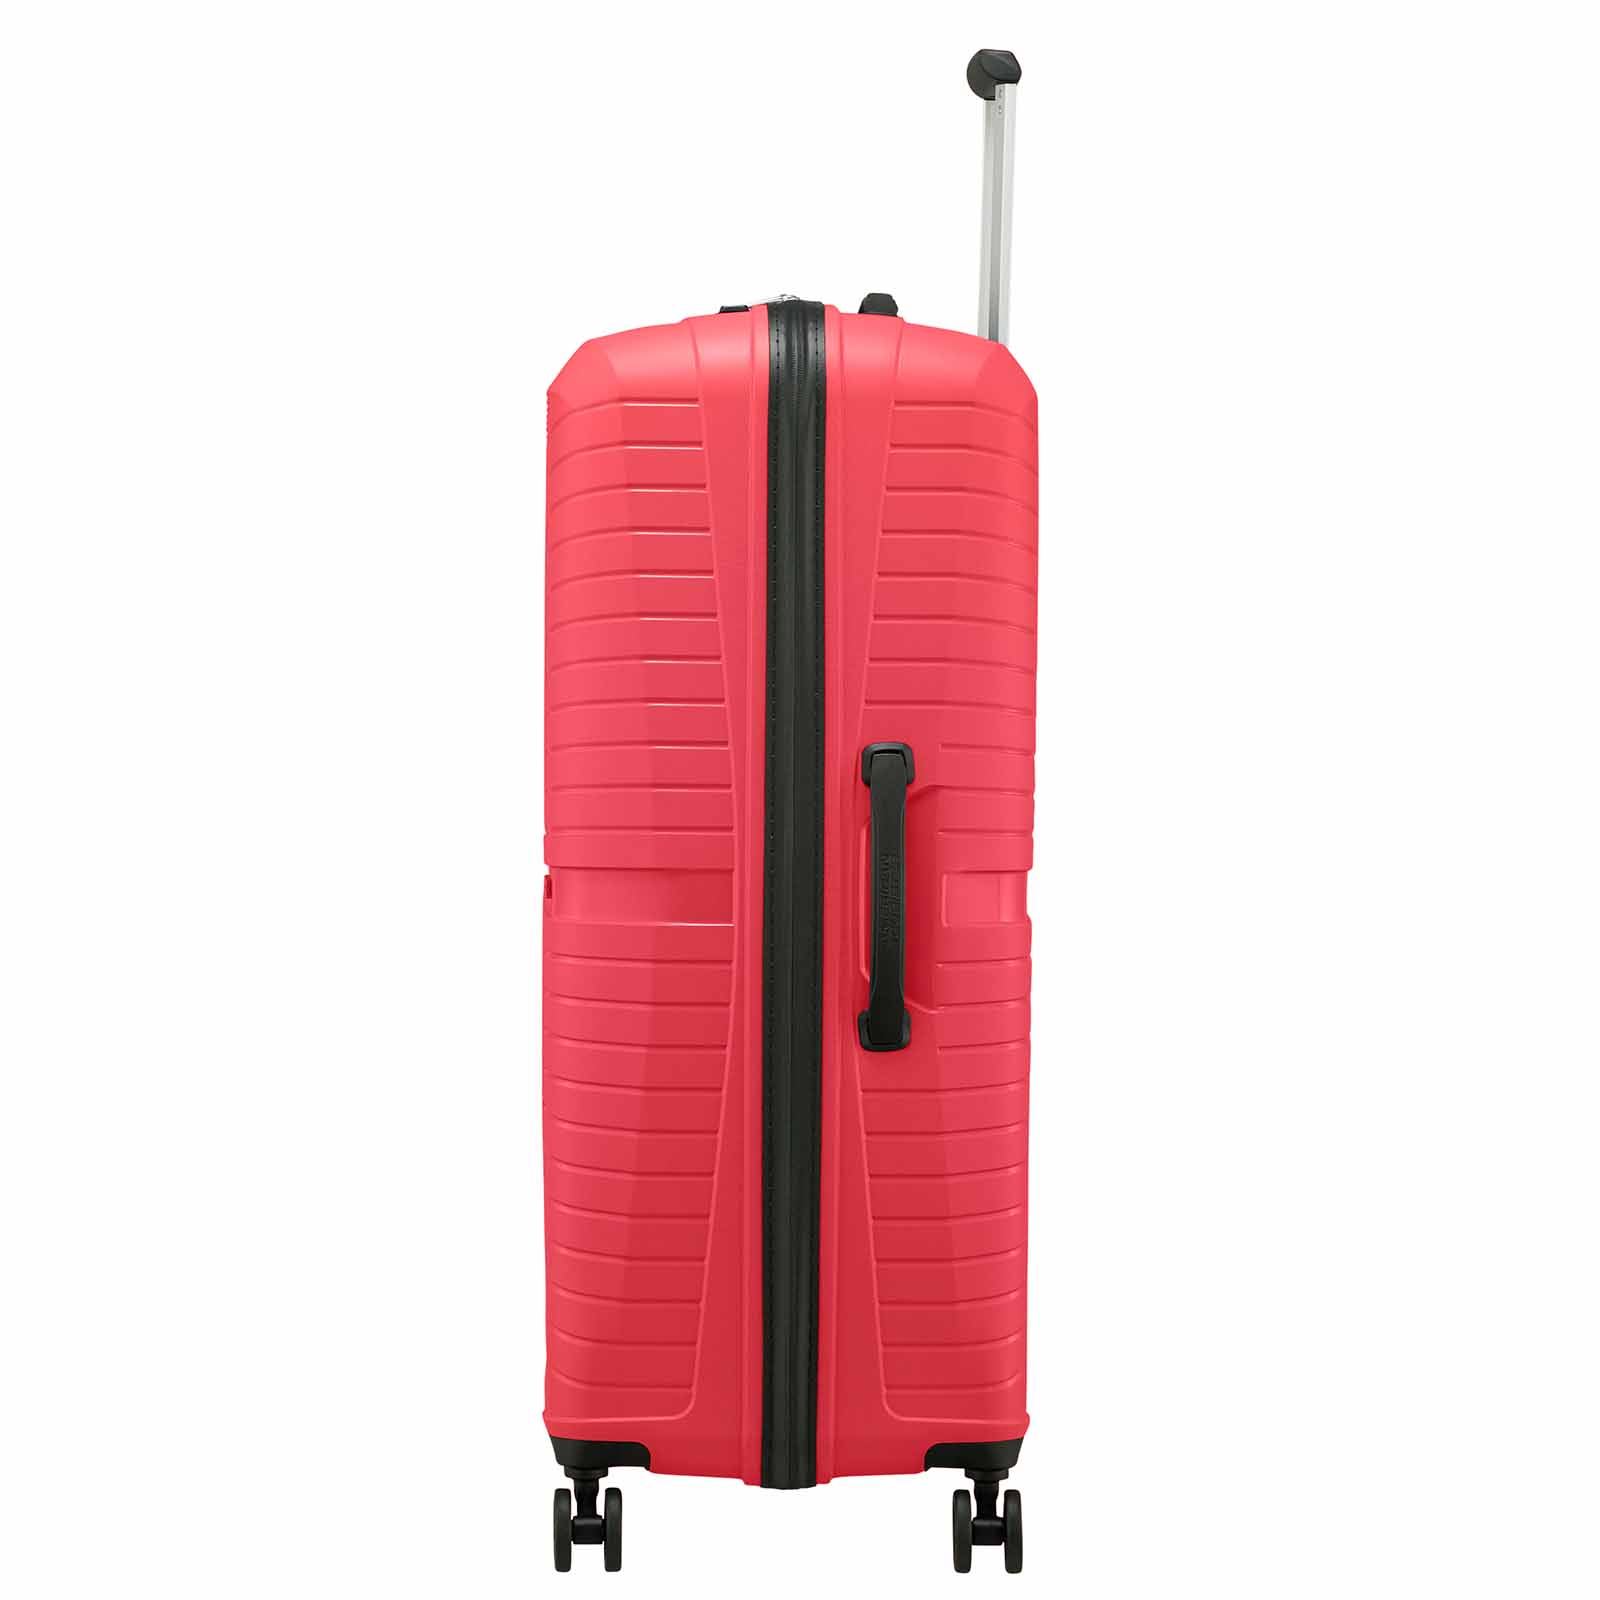 American-Tourister-Airconic-77cm-Suitcase-Paradise-Pink-Side